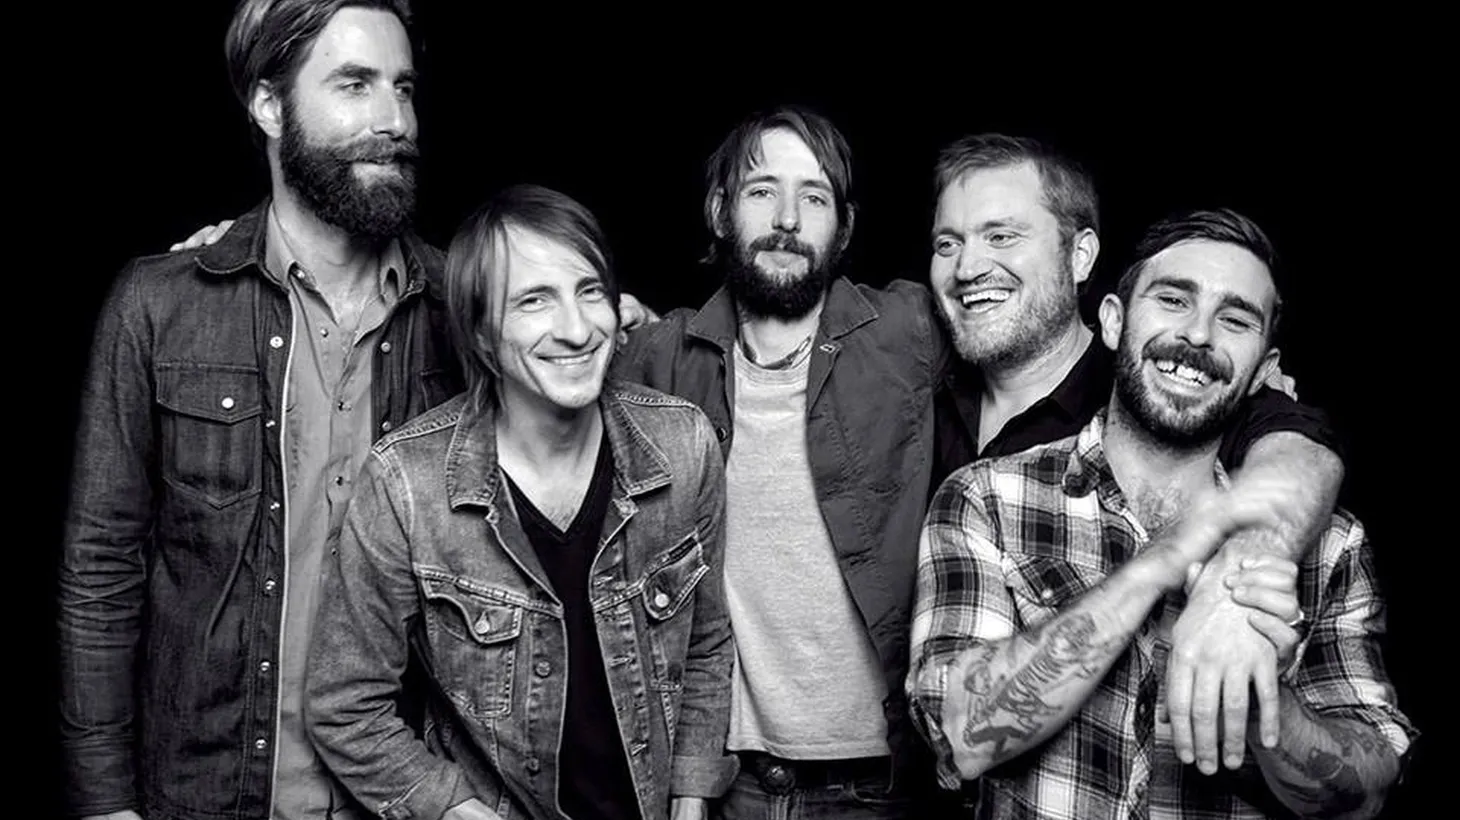 Band of Horses frontman Ben Bridwell found new inspiration thanks to Rick Rubin, who was at the helm as executive producer on the band's fifth album.